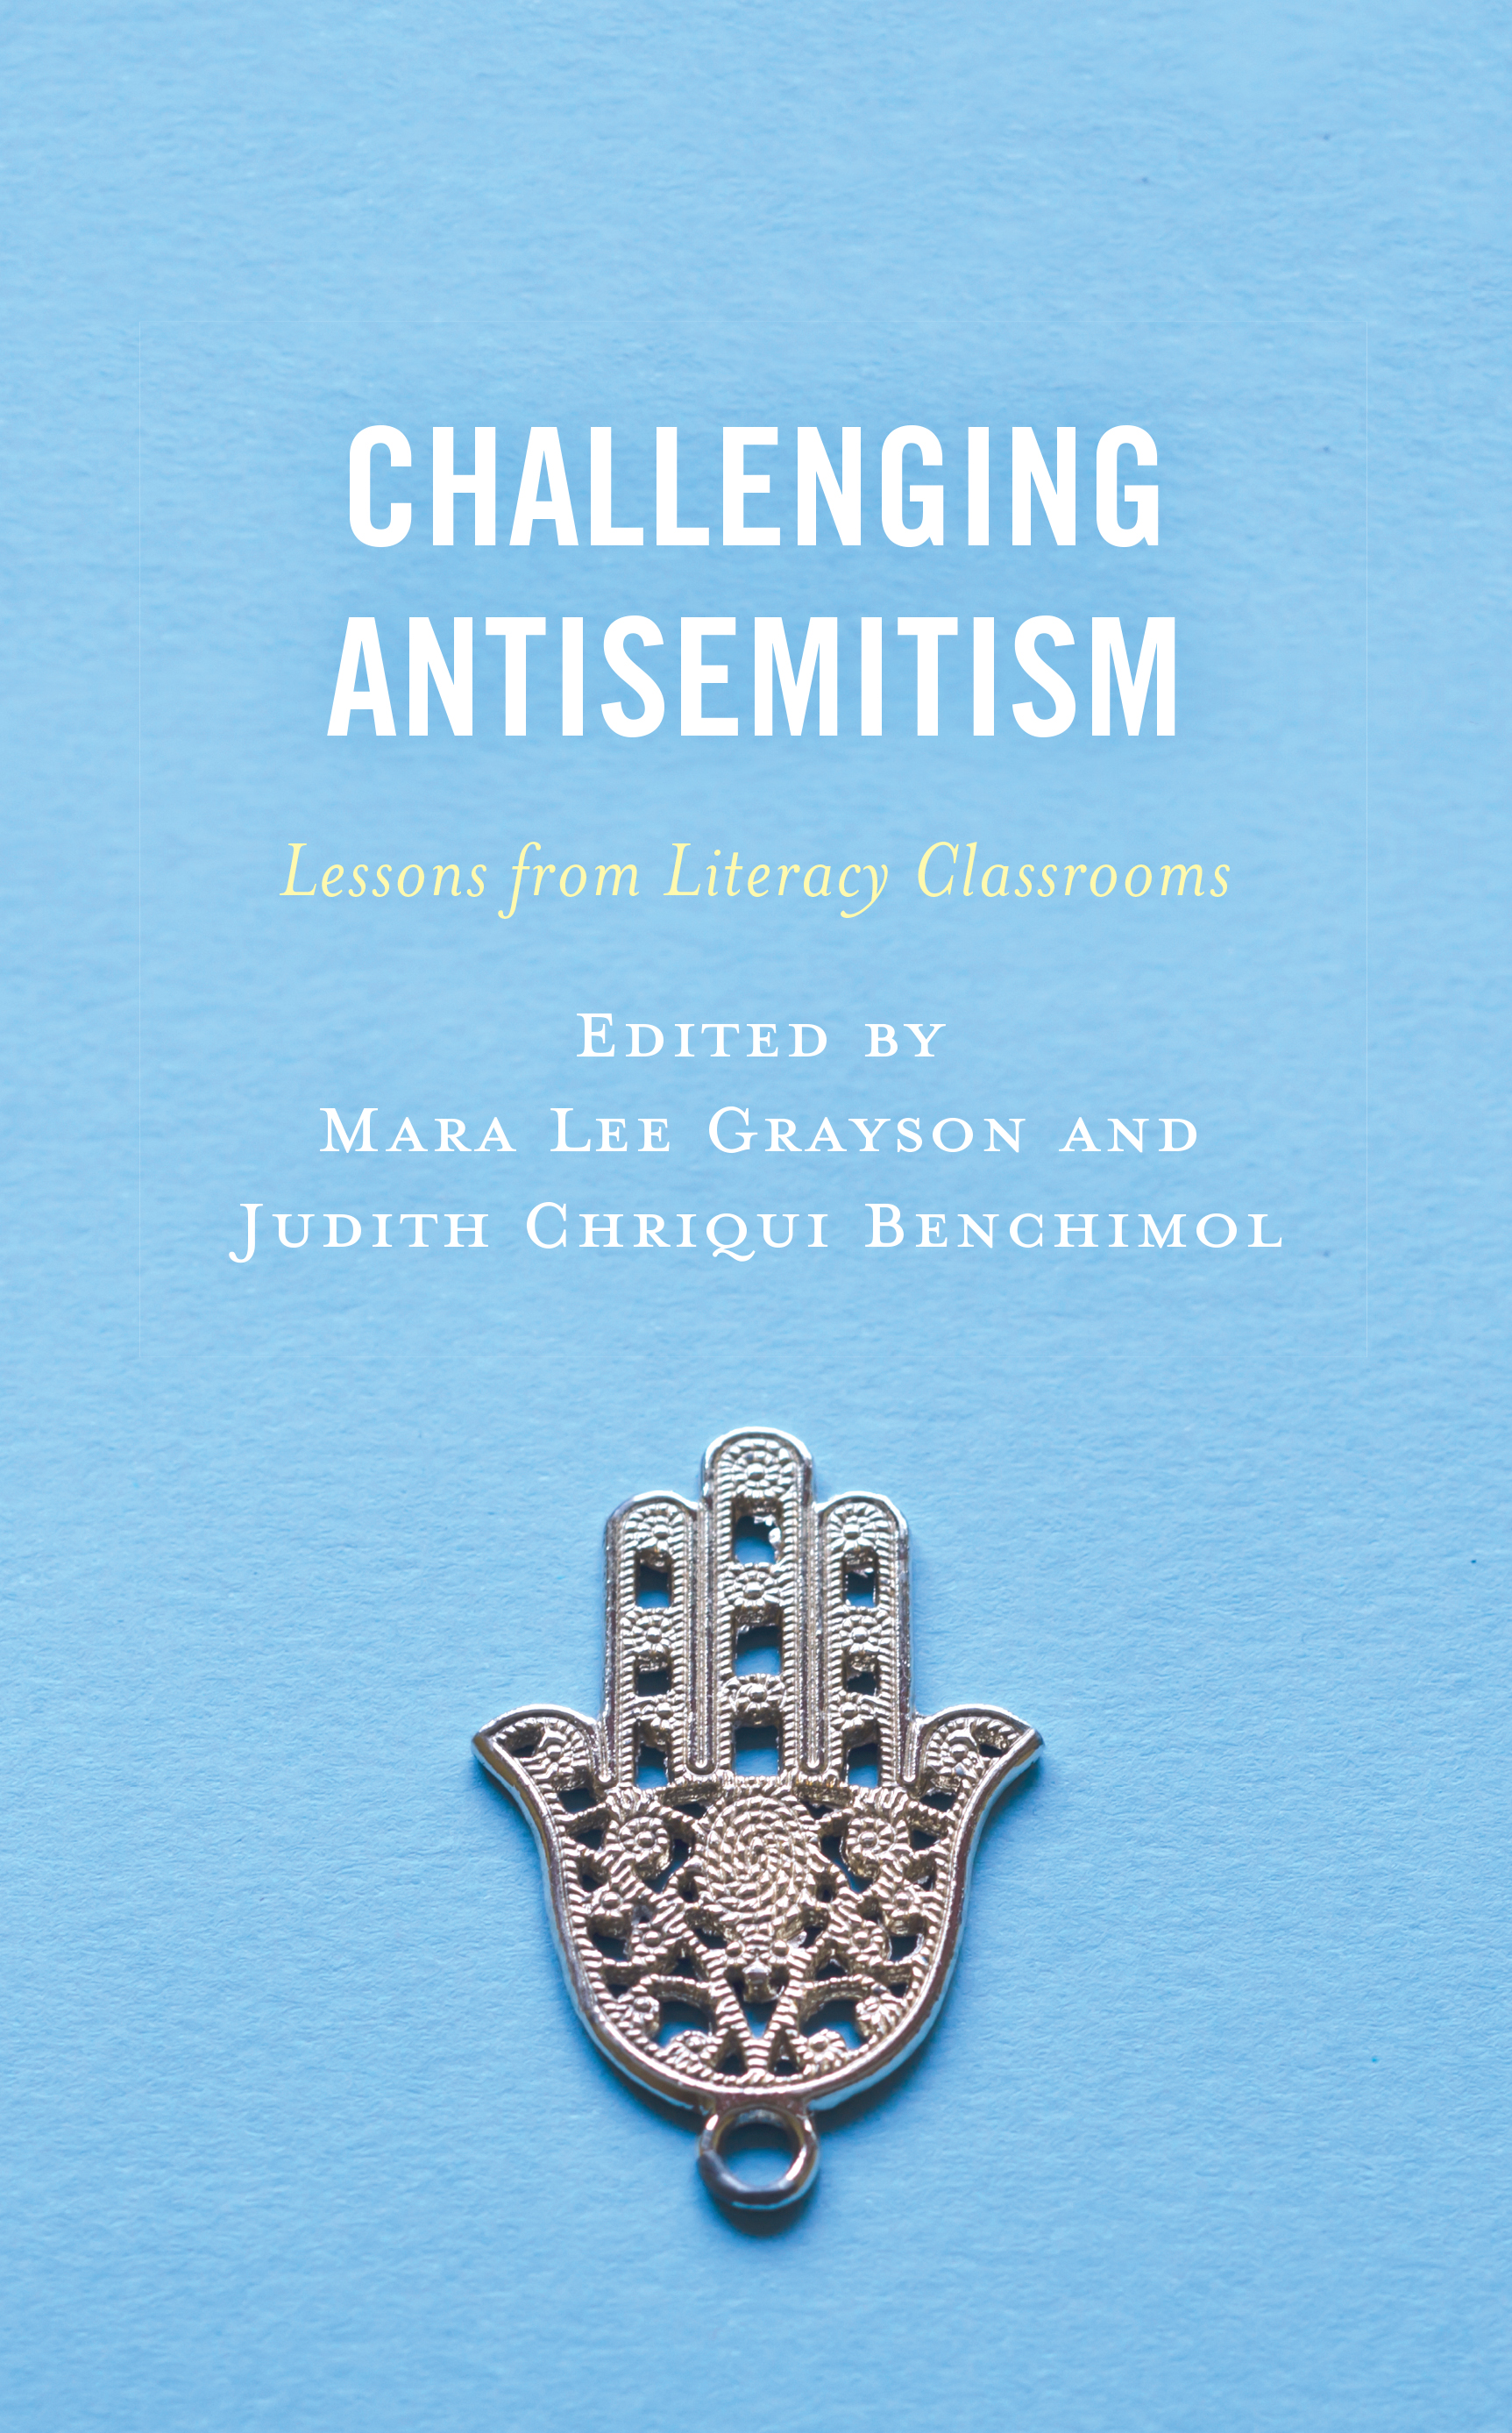 Challenging Antisemitism: Lessons from Literacy Classrooms